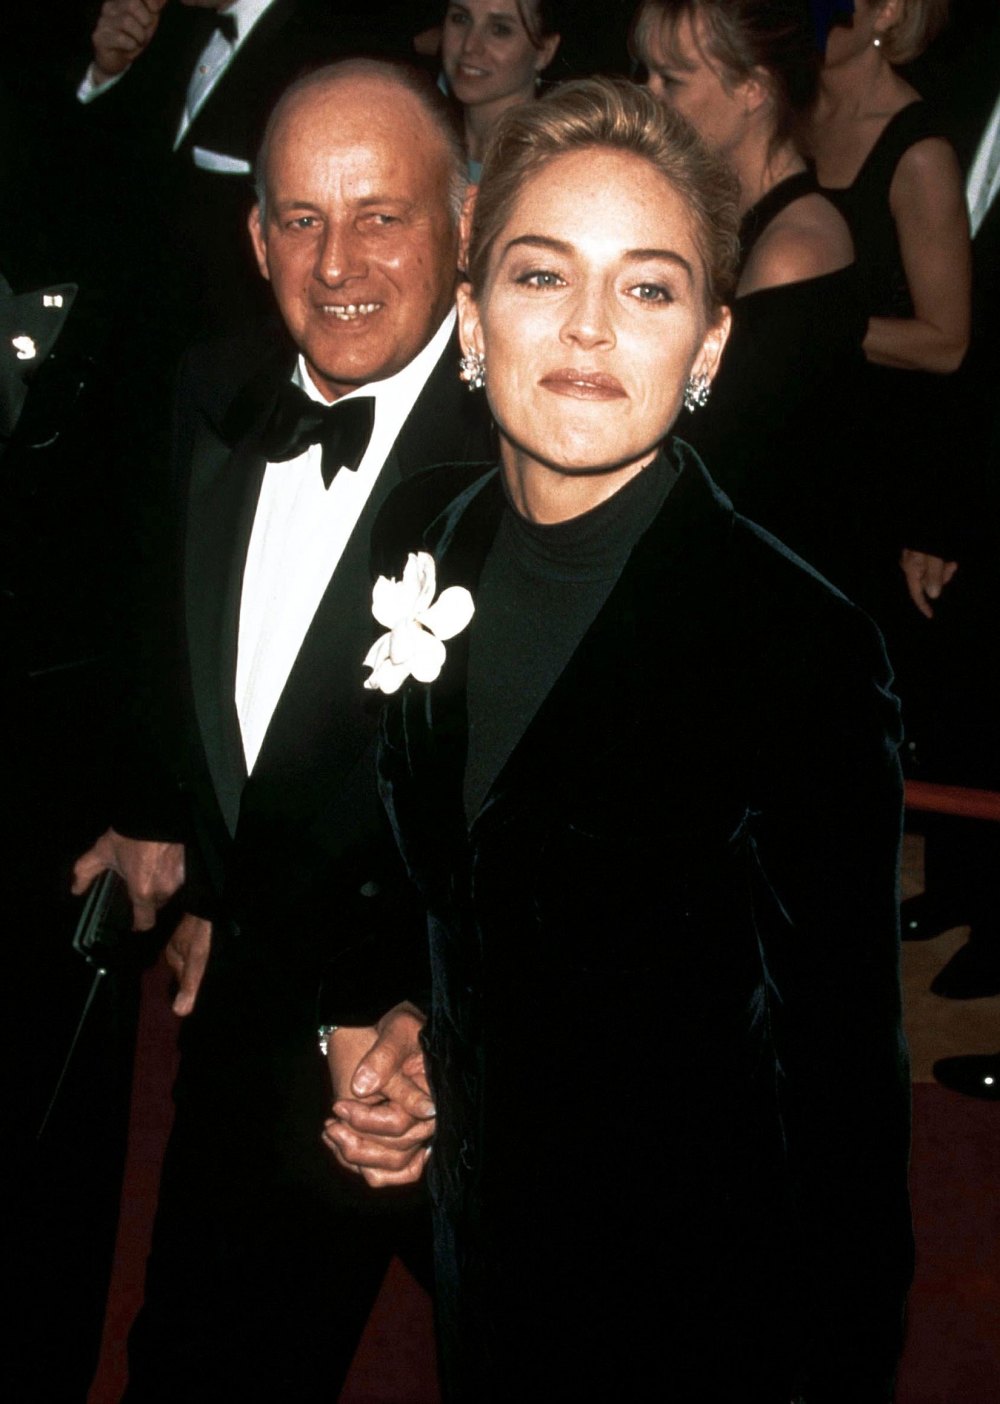 Sharon Stone Reveals Why She Wore That Iconic Gap Shirt to the 1996 Oscars